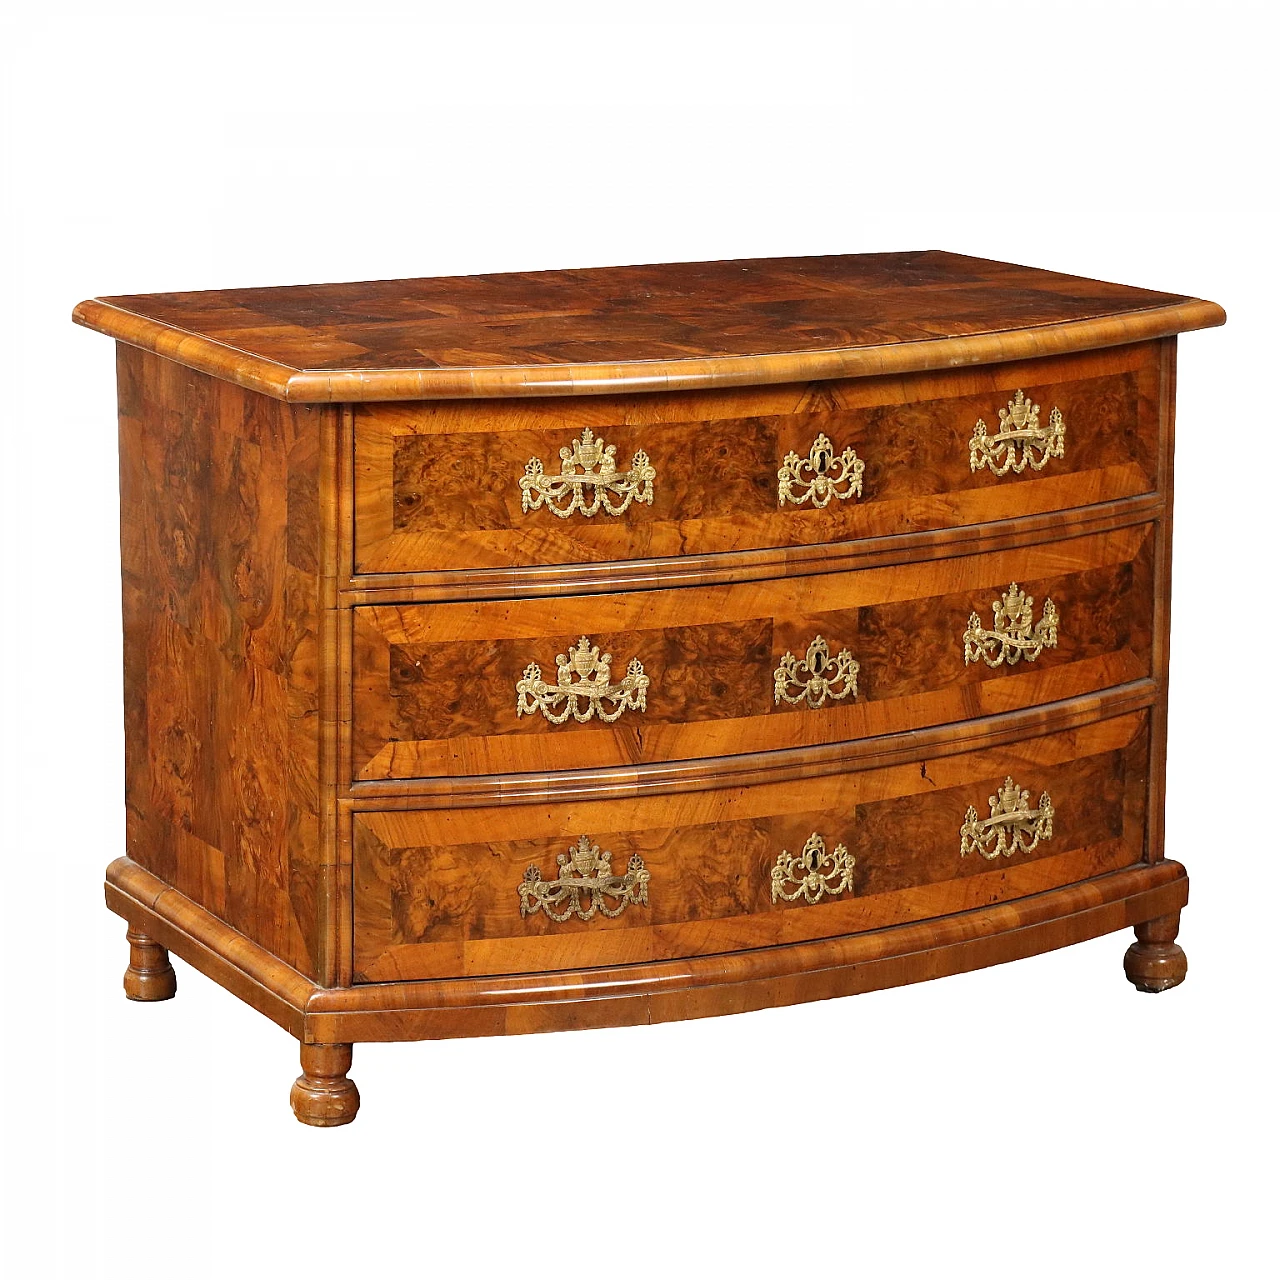 Spruce & walnut dresser with bronze handles and drawers, 18th century 1